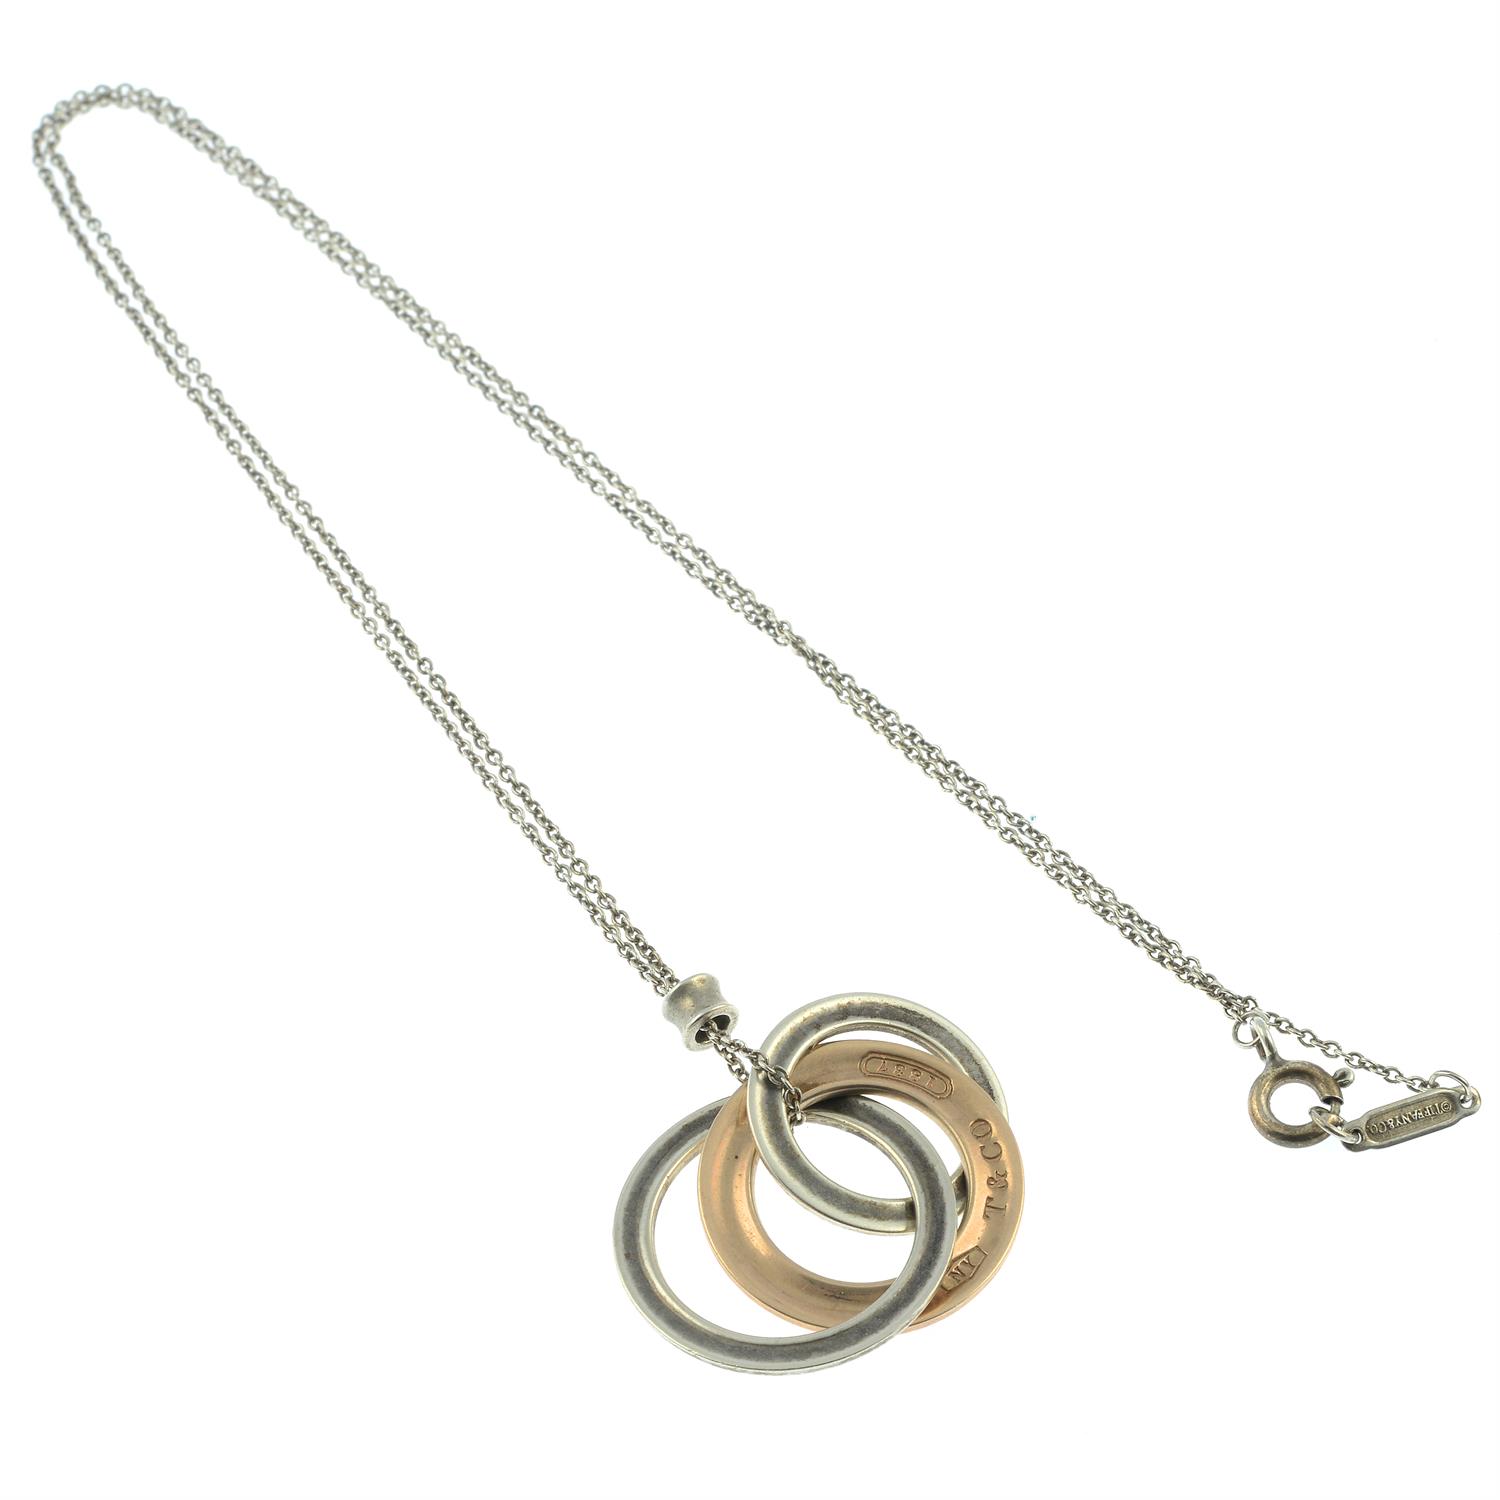 An interlocking three circle 'Tiffany 1837' pendant, with integral chain, by Tiffany & Co. - Image 2 of 2